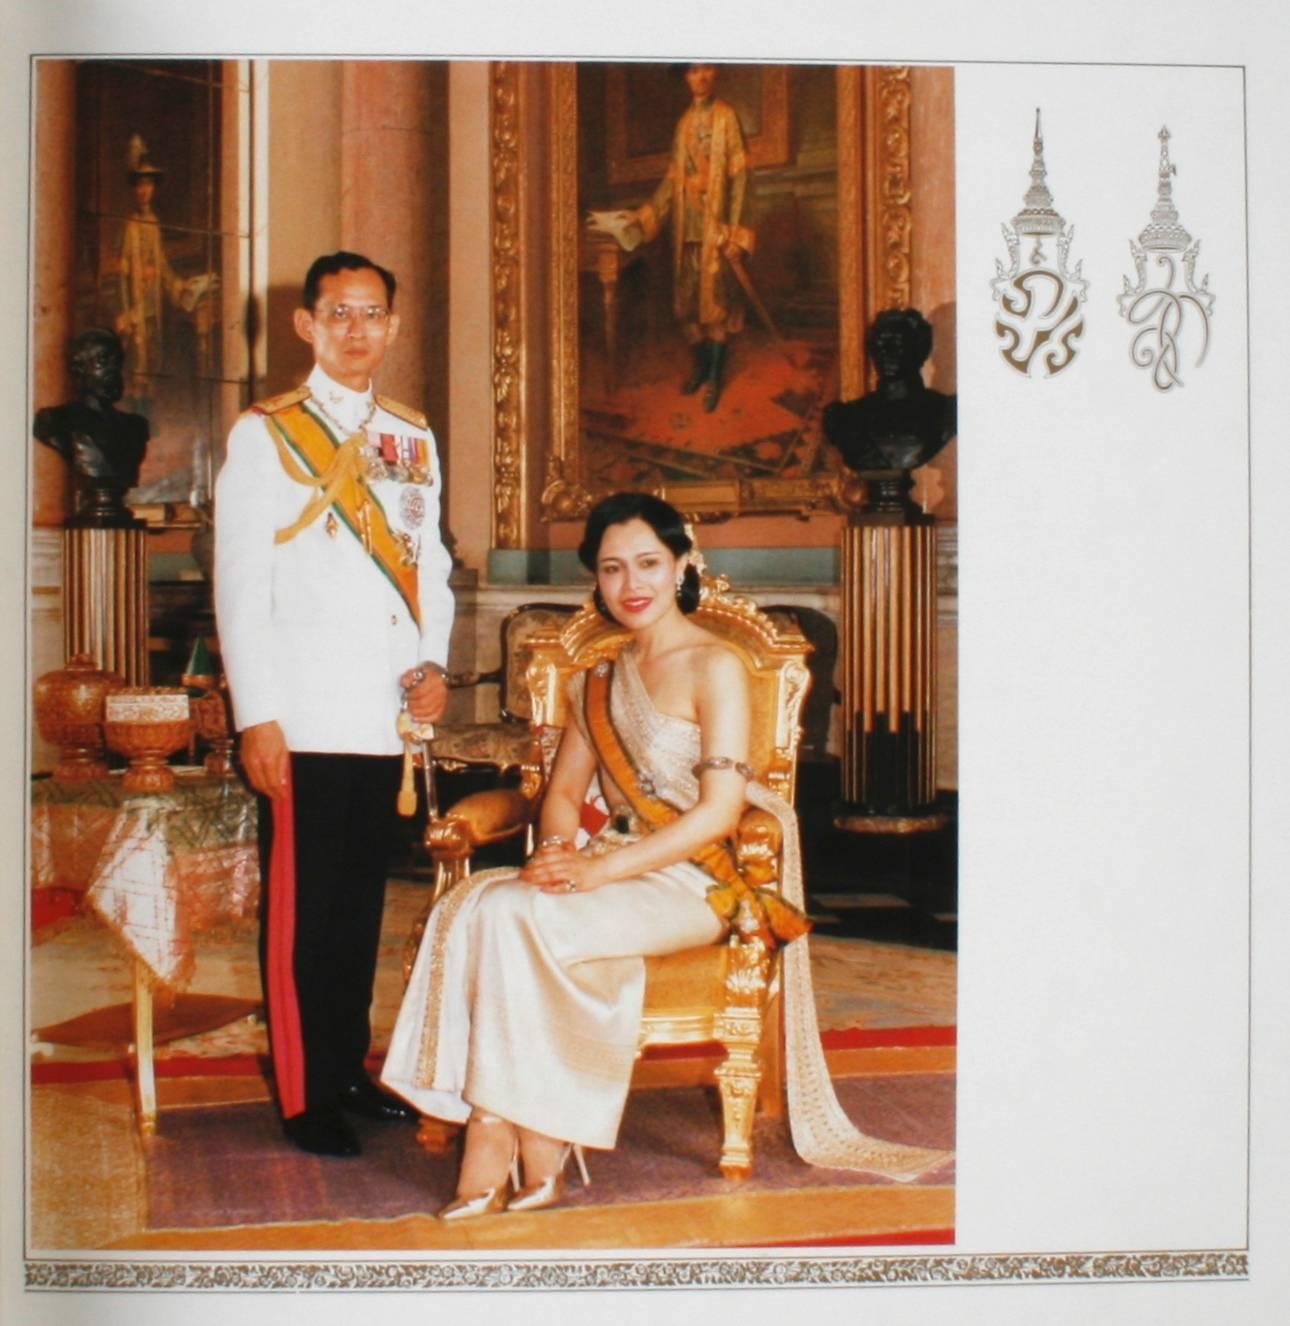 The Fabergé collection of his late Majesty King Chulalongkorn of Thailand. Bangkok: Her Royal Highness Princess Maha Chakri Sirinthorn, 1983. First edition hardcover in original presentation box. 228 pp. Text is in English and Thai. A beautiful and